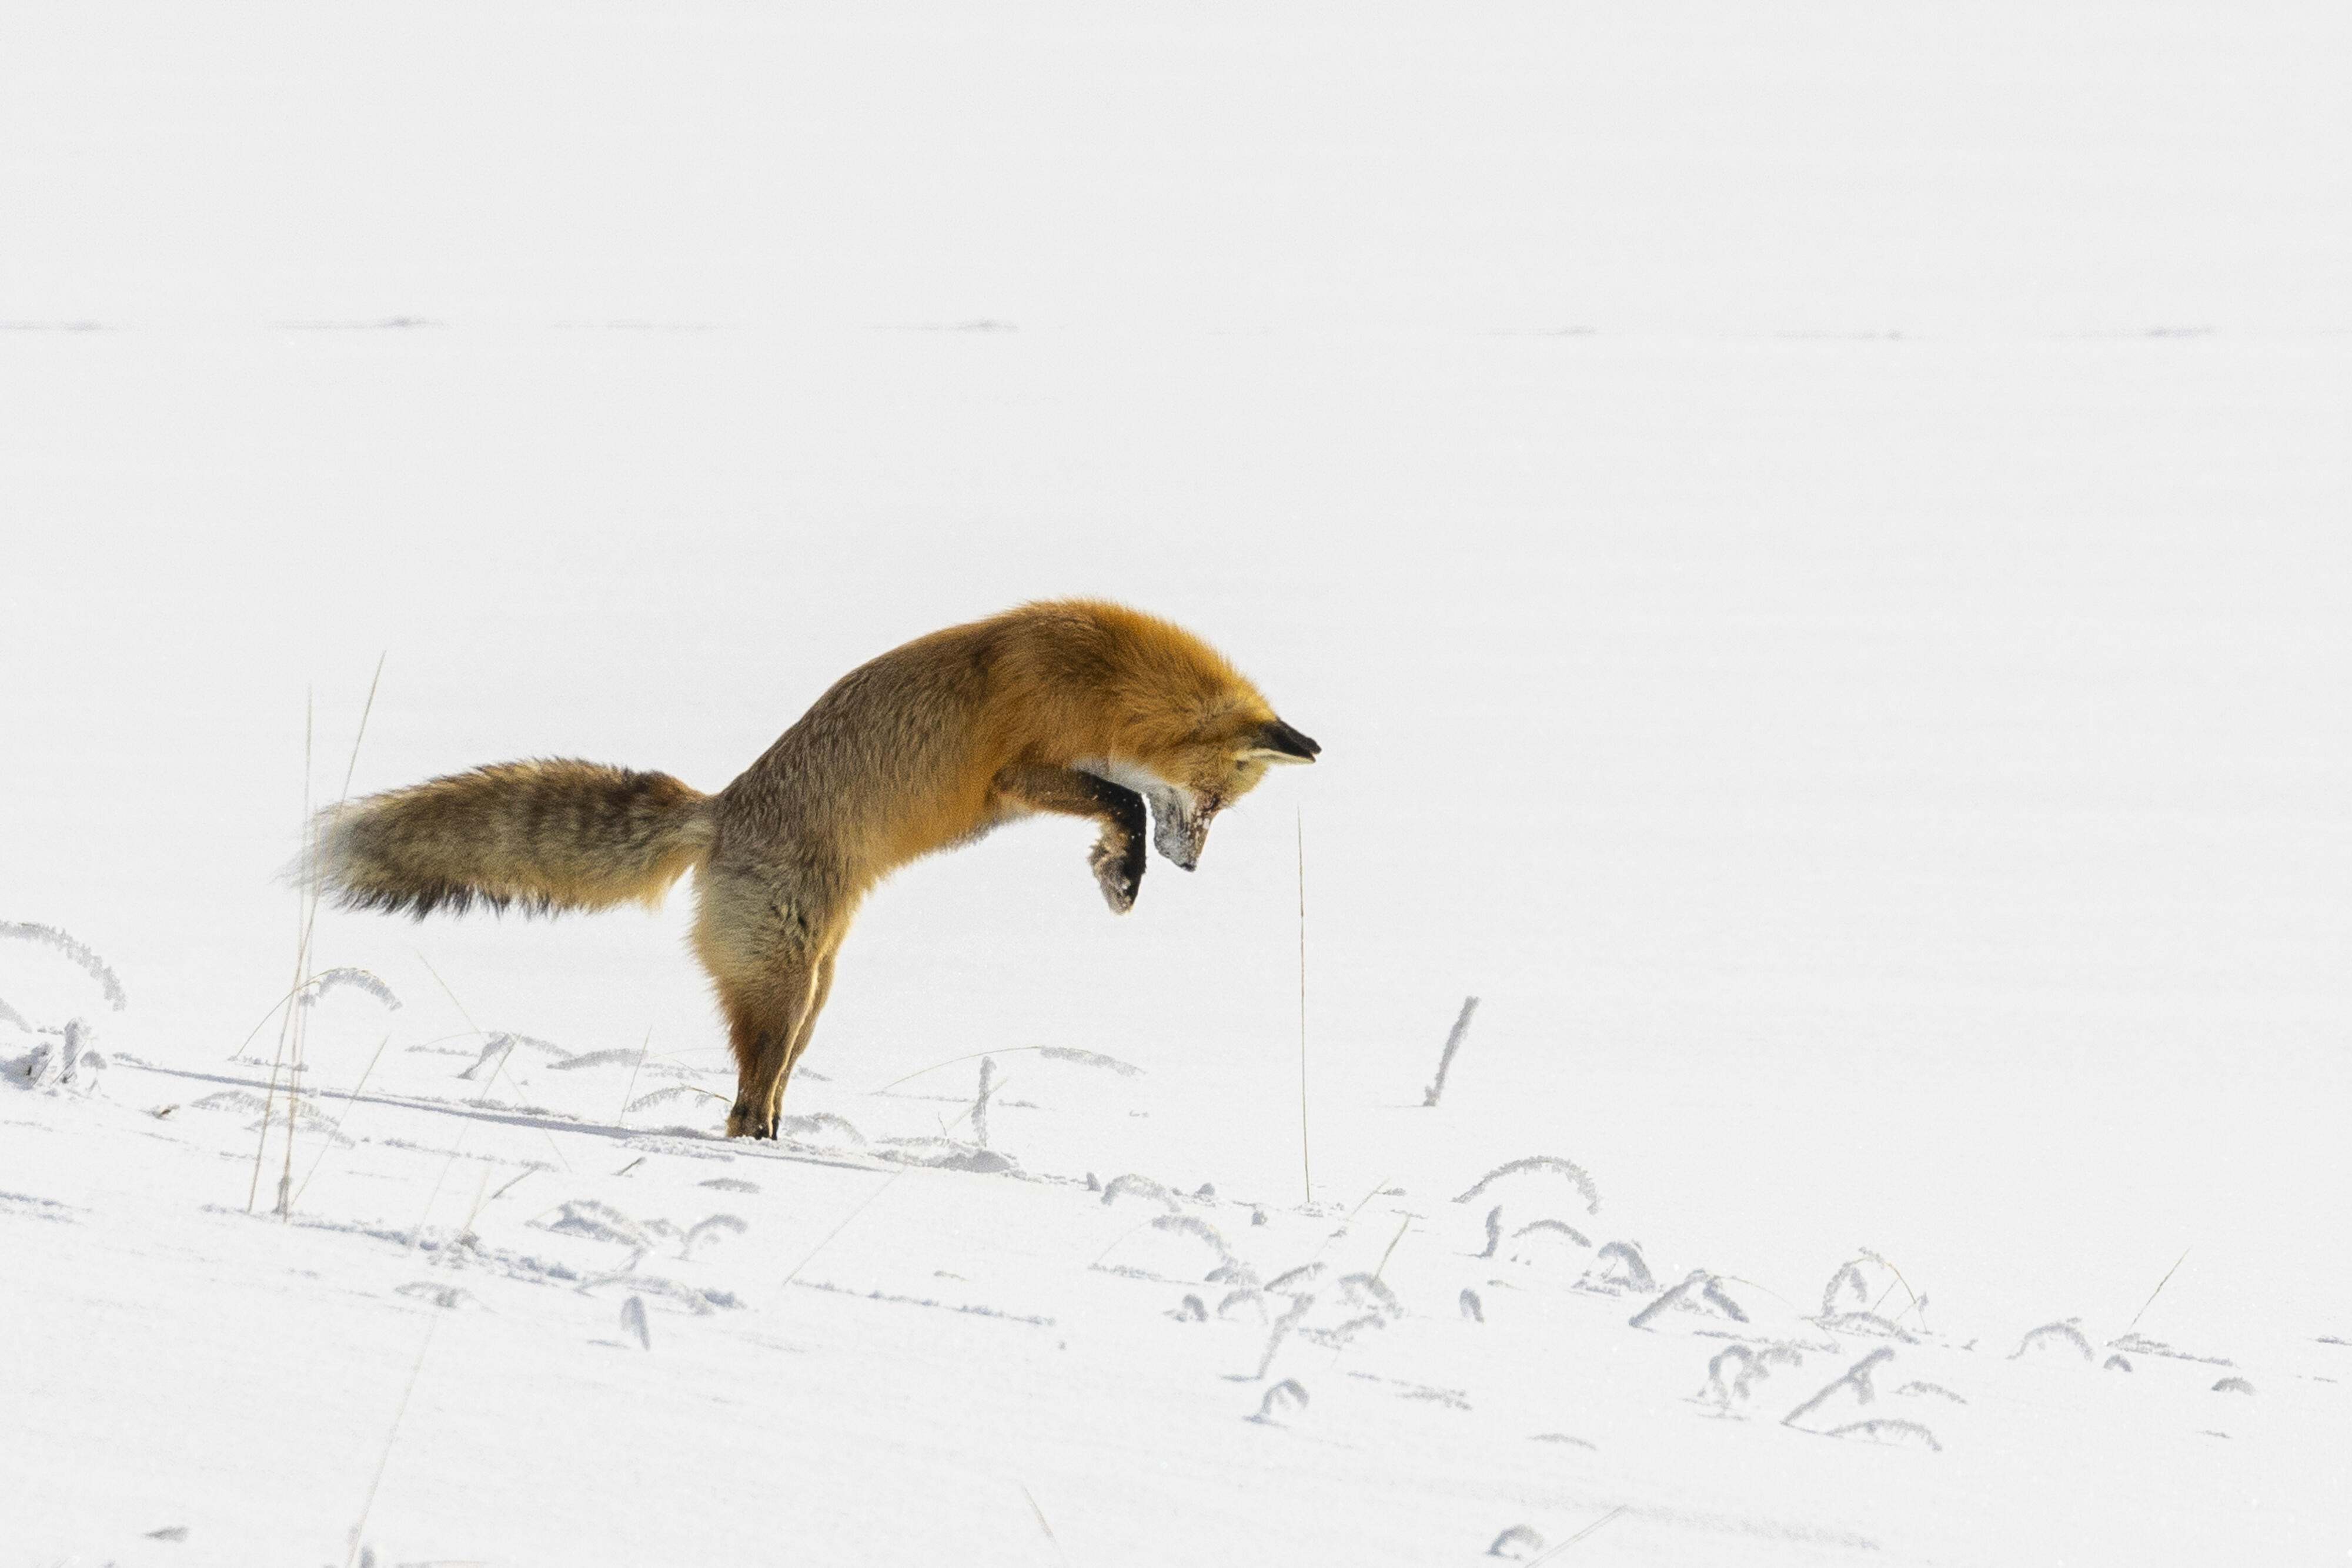 A red fox pounces into snowy ground.